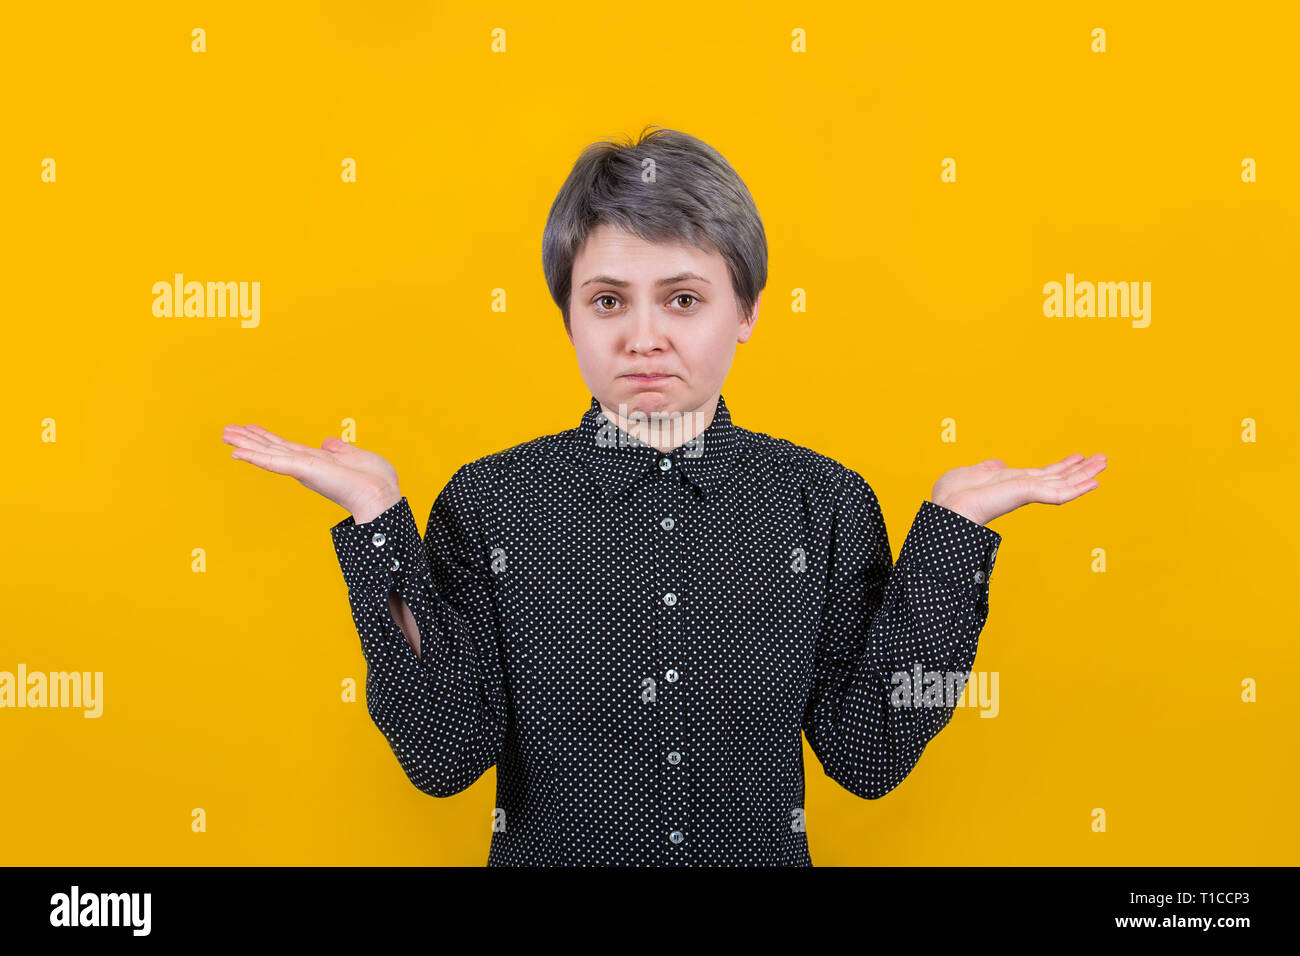 Clueless puzzled woman with widely opened eyes having hesitation shrugging her shoulders expressing uncertainty. Facial expressions, life perception a Stock Photo